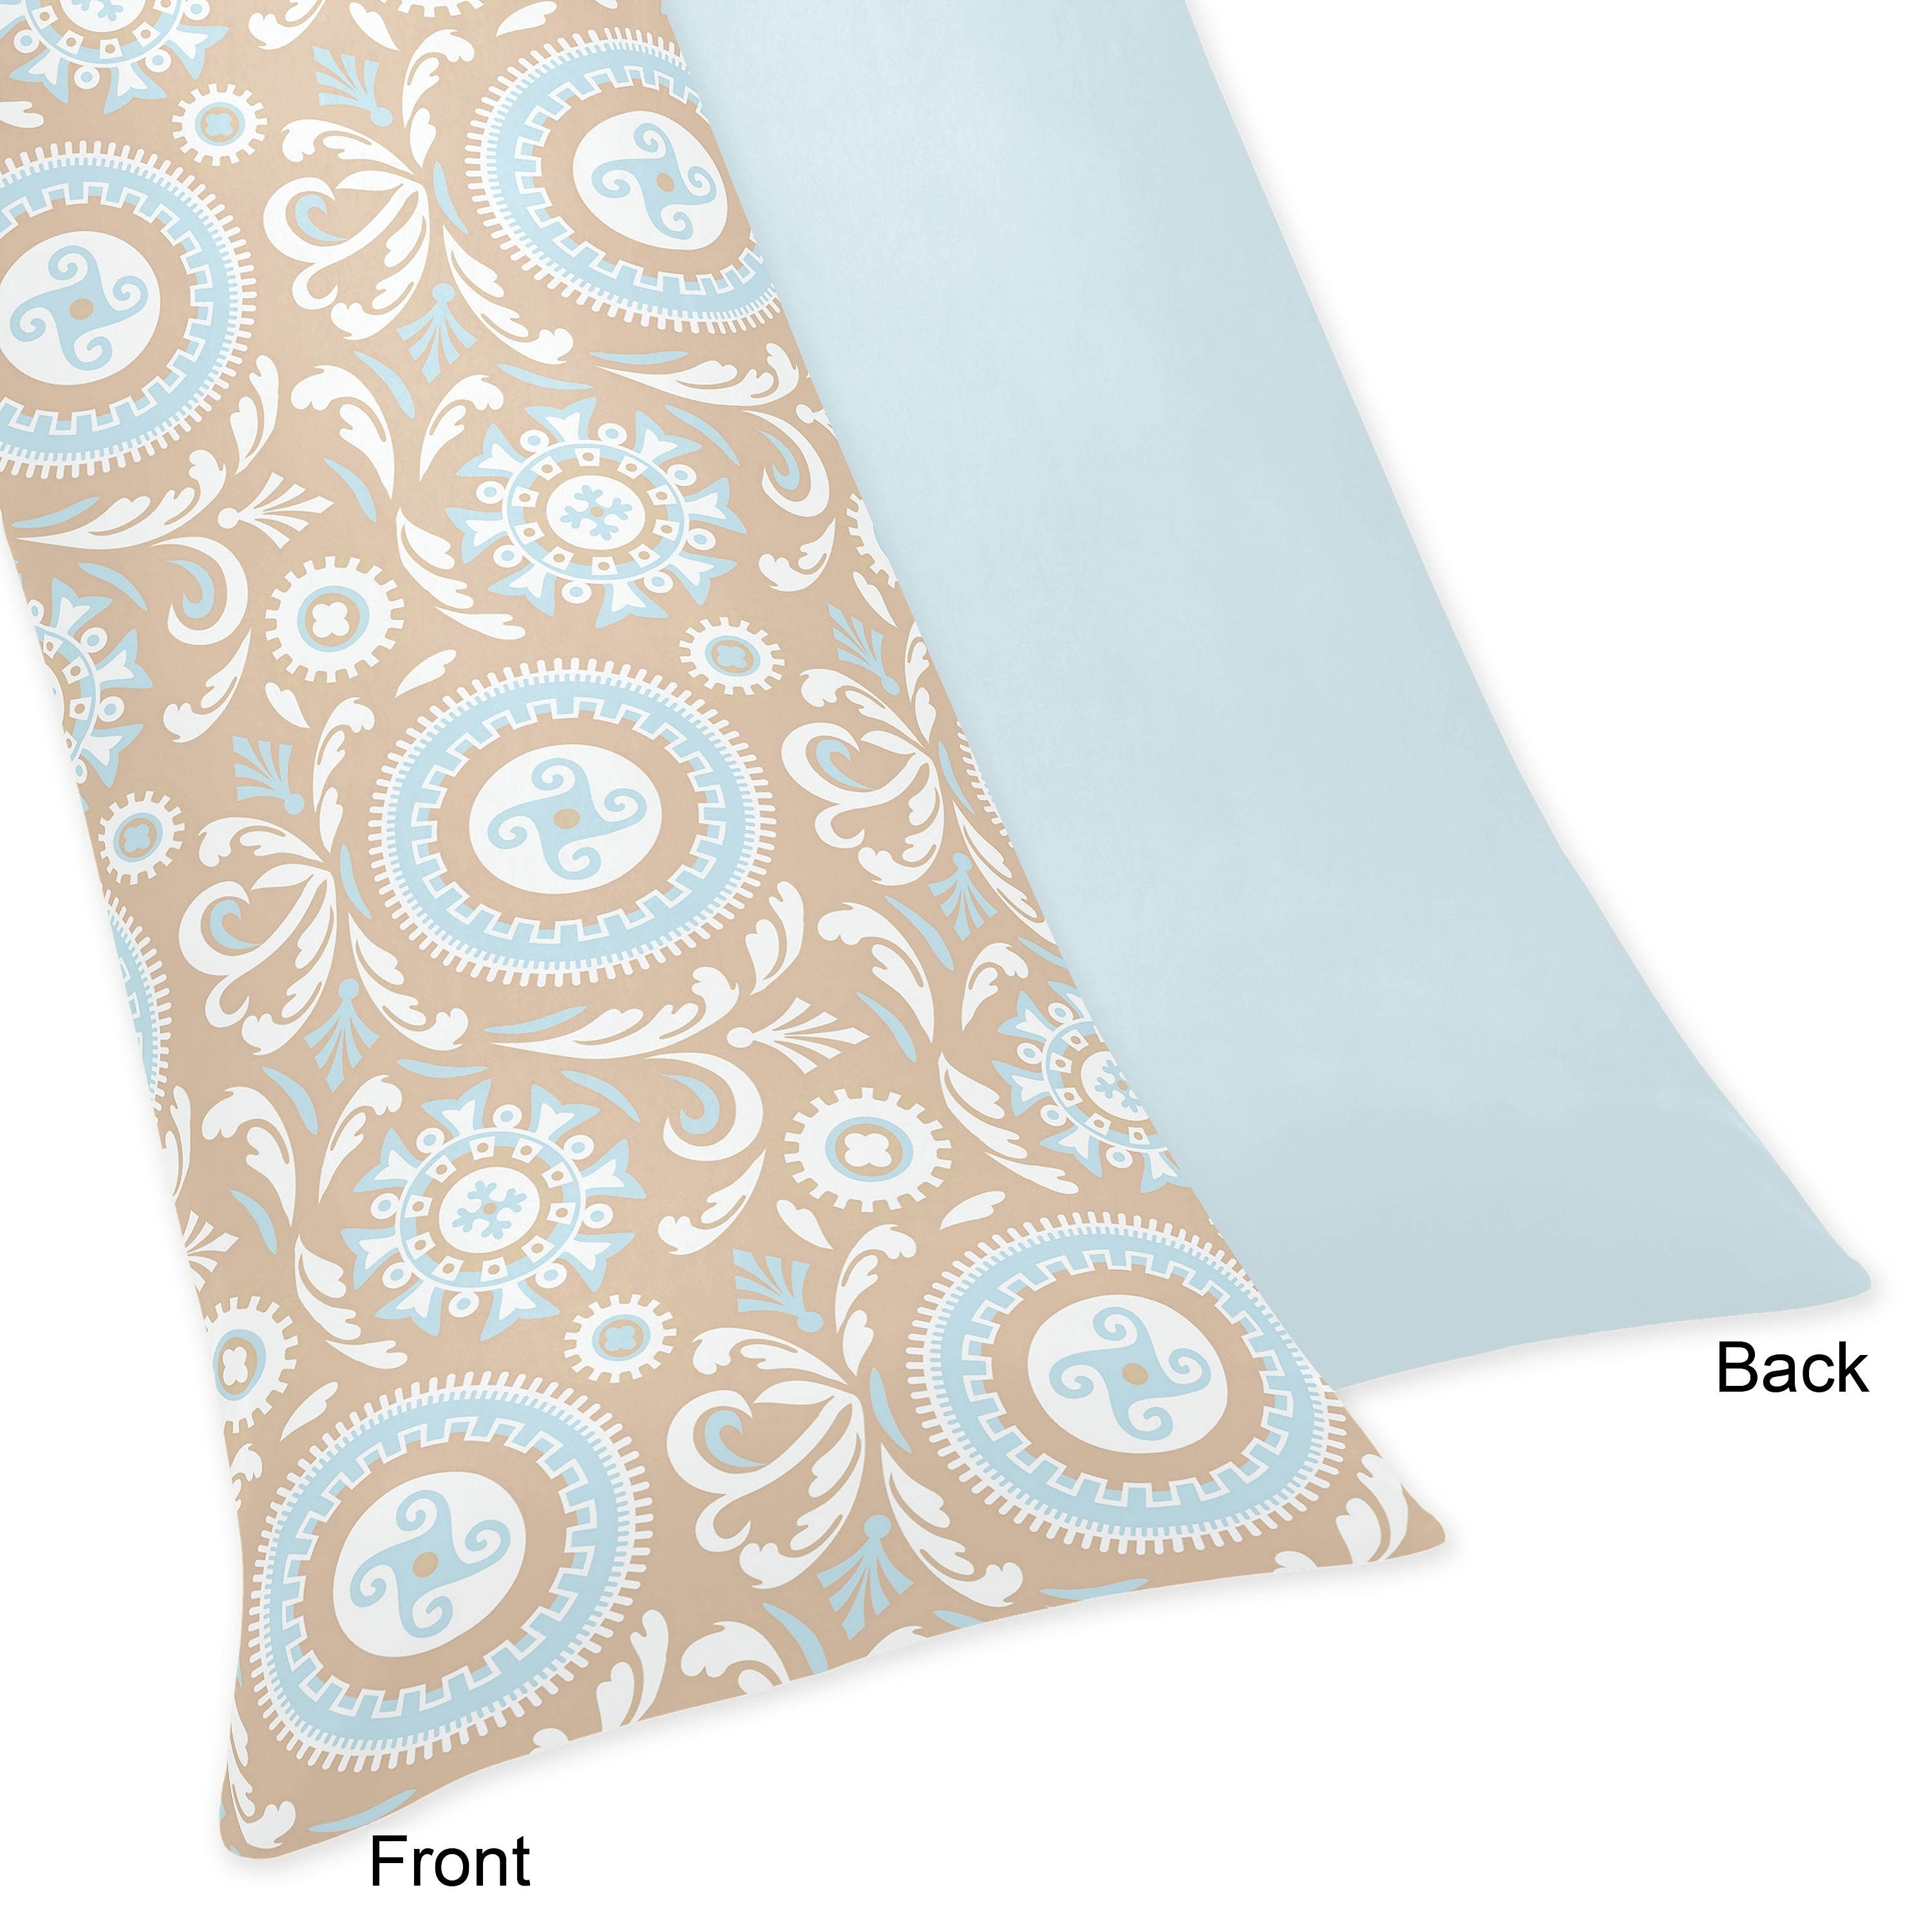 Sweet Jojo Designs Blue And Taupe Hayden Full Length Double Zippered Body Pillow Case Cover By Sweet Jojo Designs Blue Size Standard